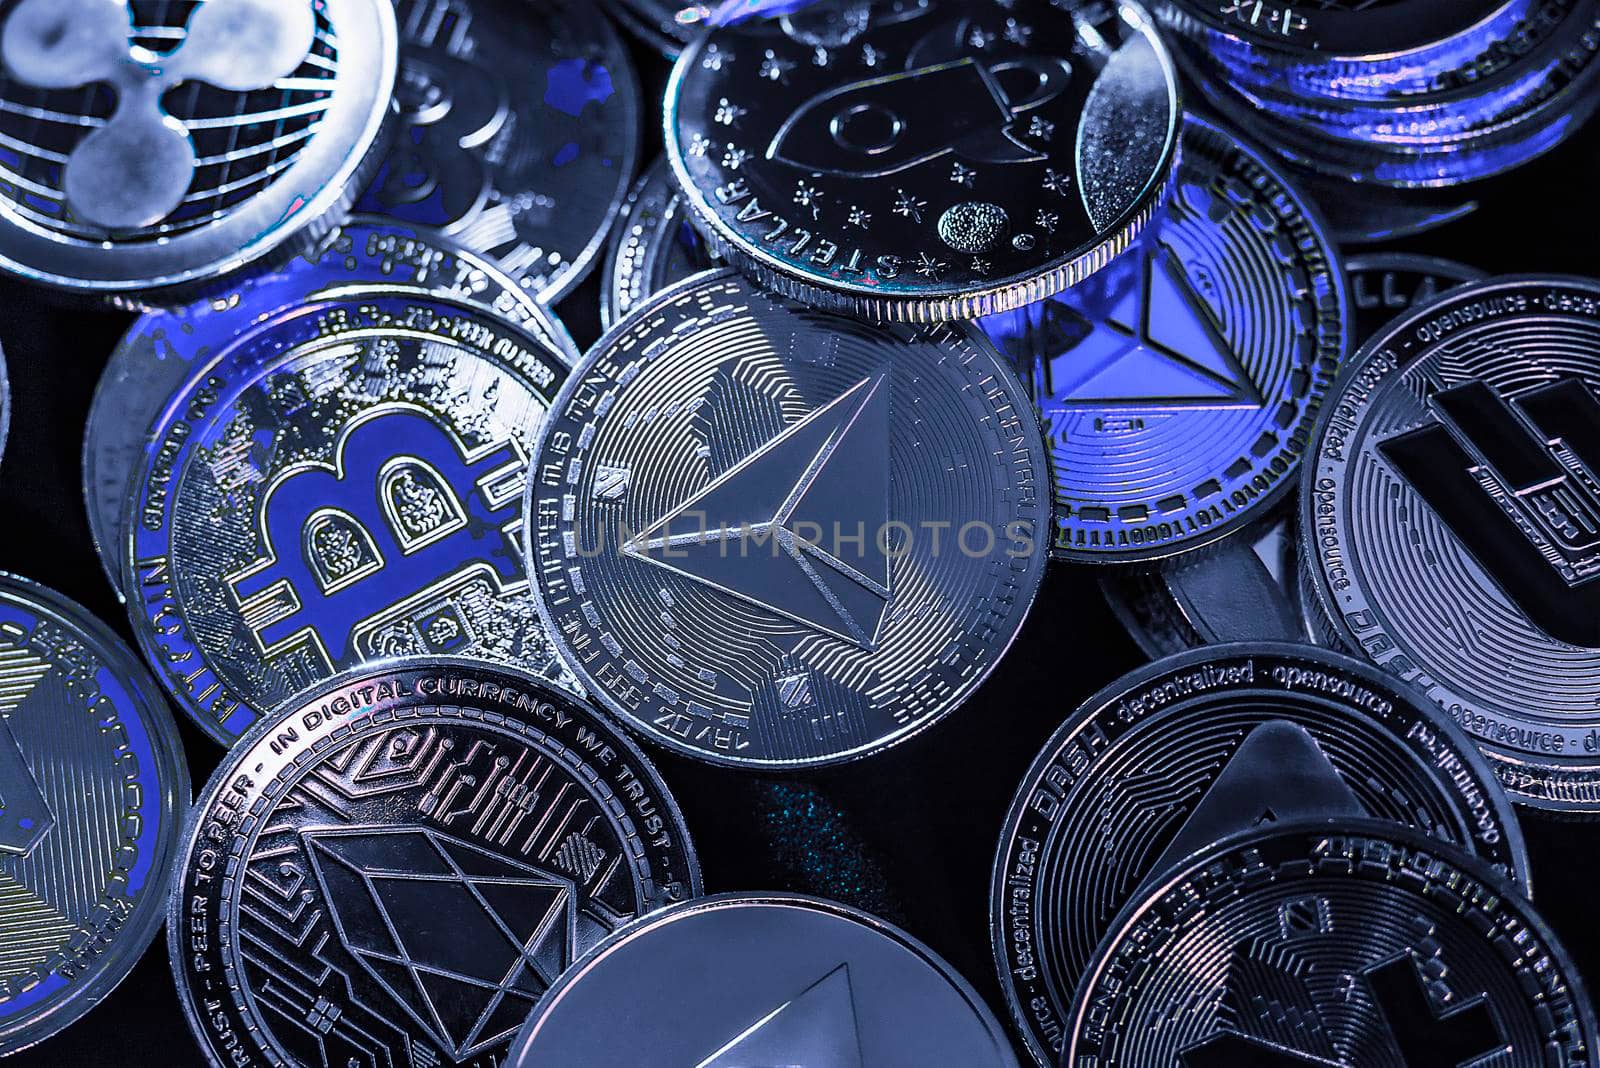 Horizontal view of cryptocurrency tokens, including Bitcoin, Tron, and Dash saw from above on a black background by avirozen